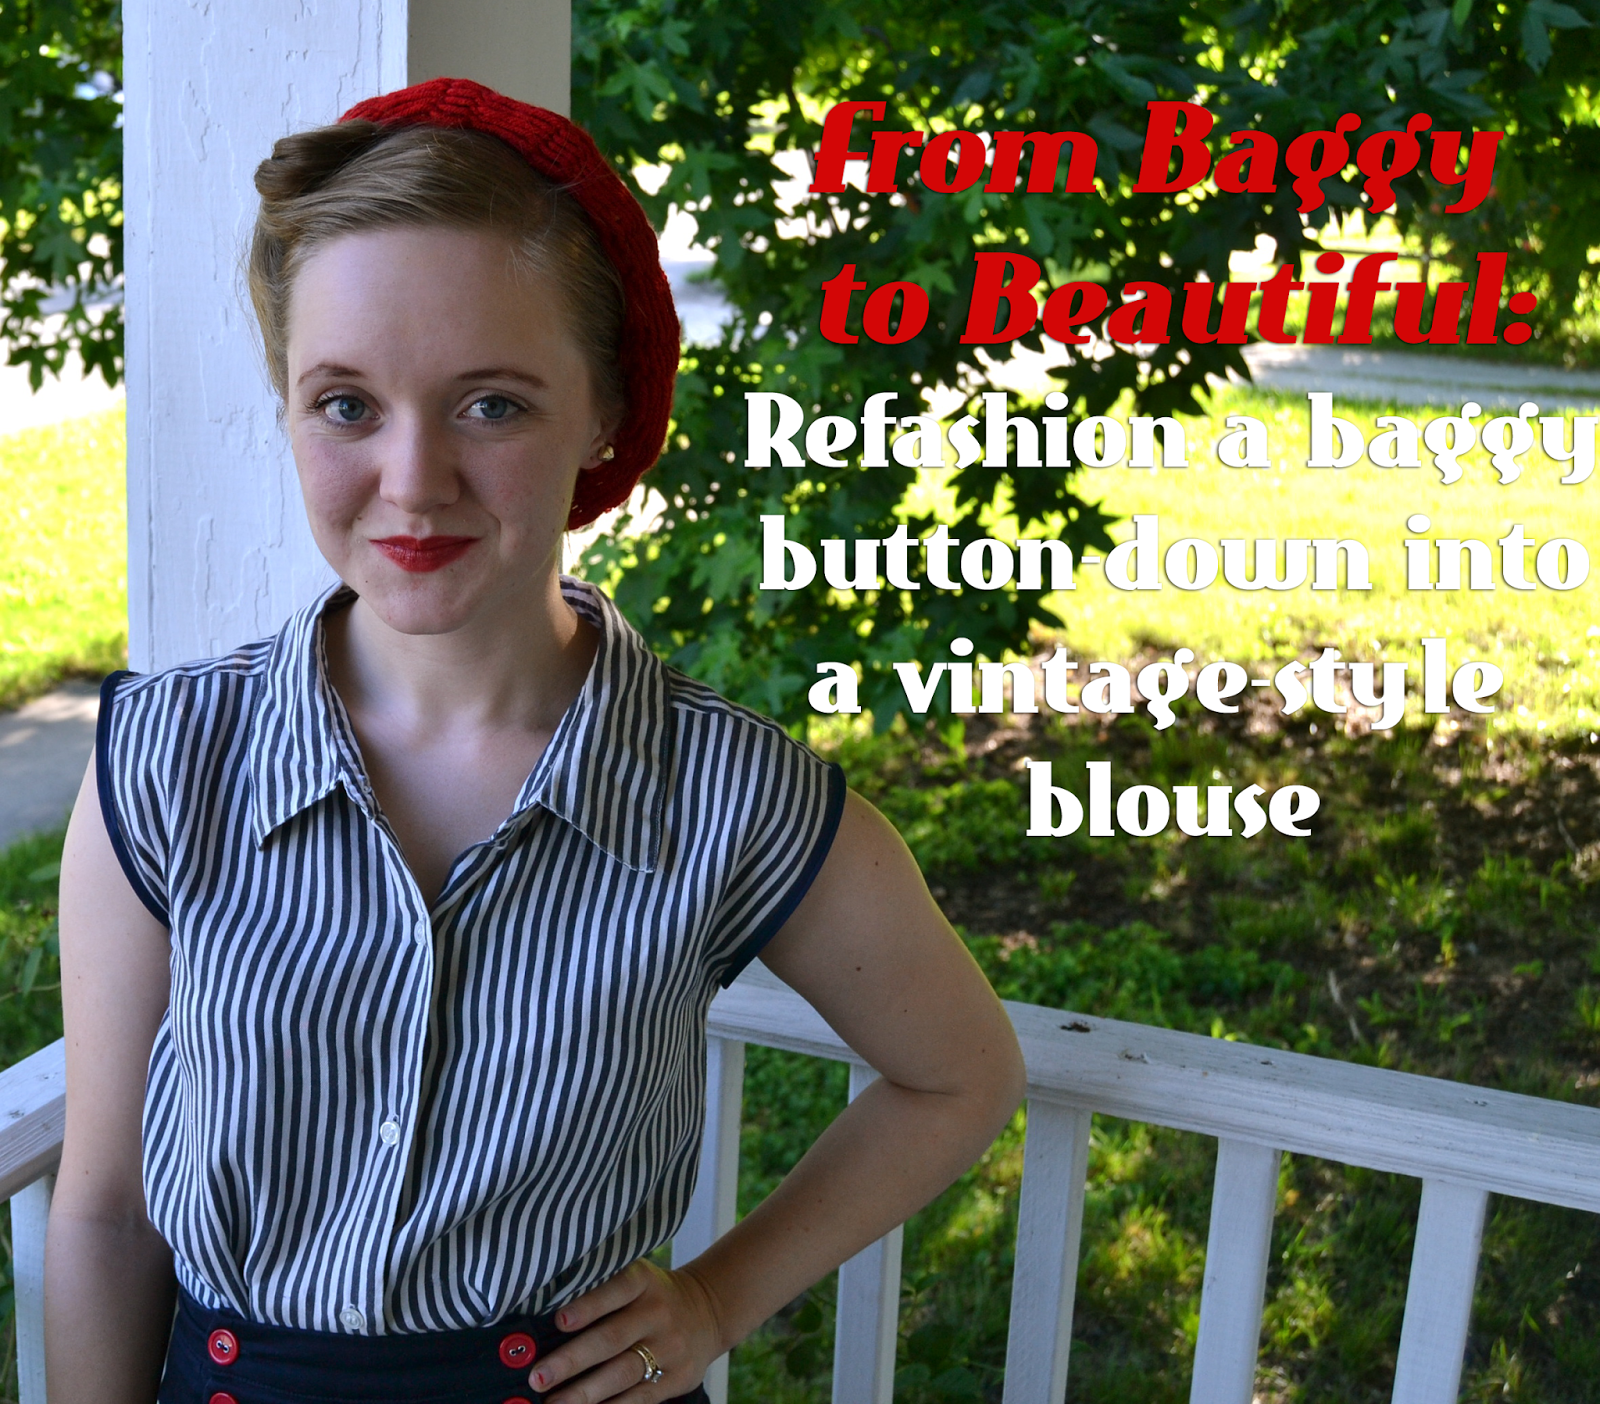 Flashback Summer: DIY - Refashion a too-big, baggy button-down into a vintage-style blouse